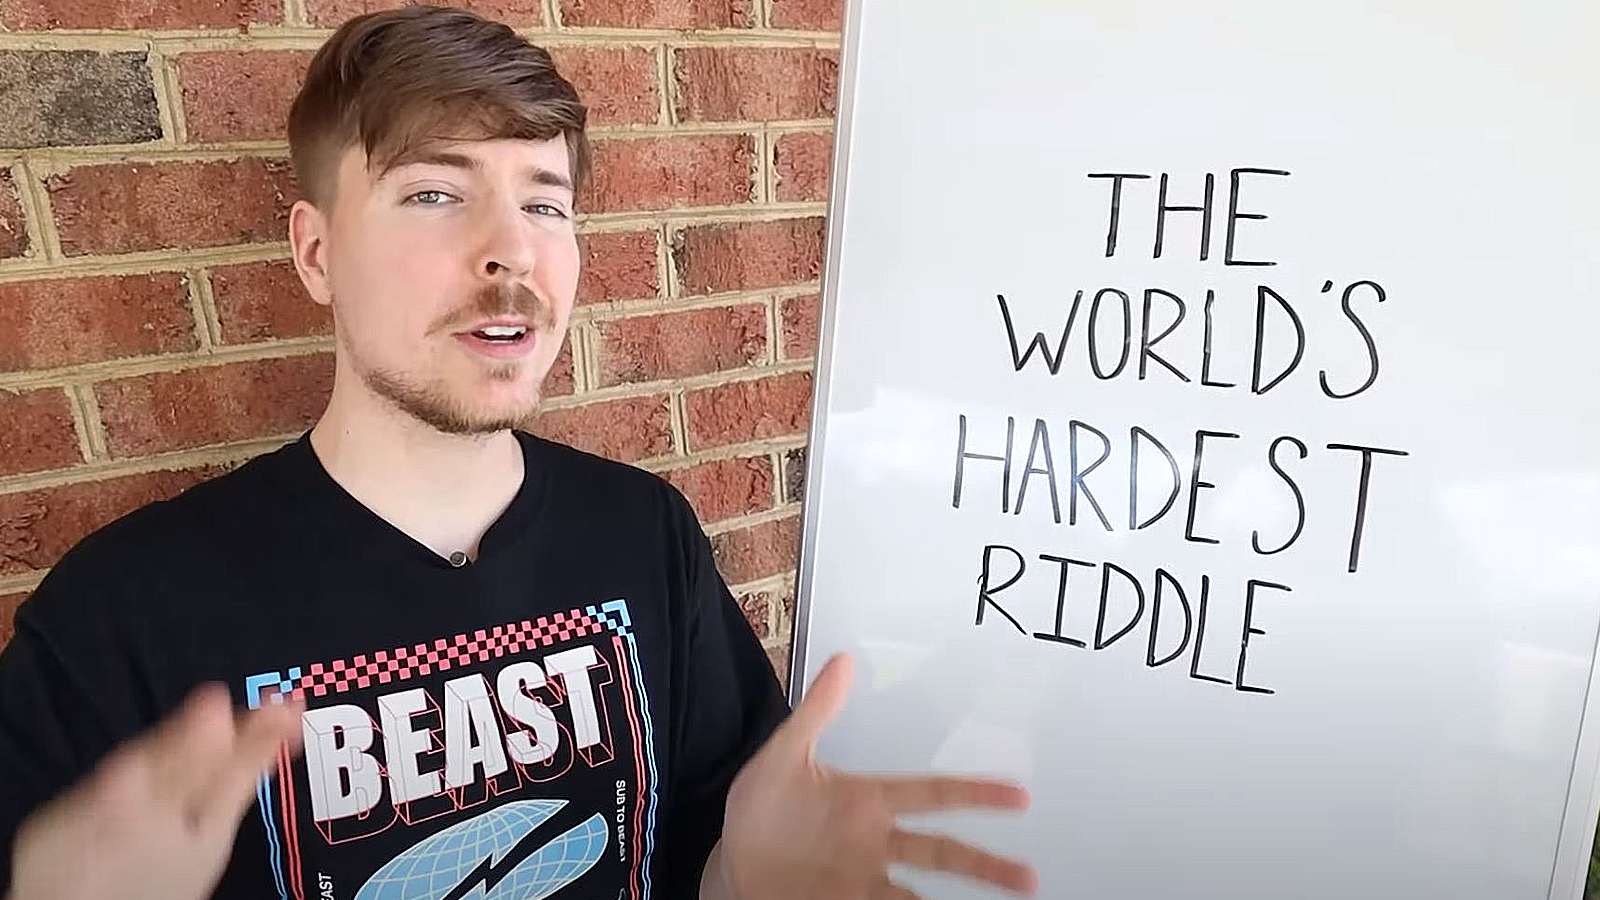 Mr Beast stands next to a white board that reads, "World's hardest riddle."